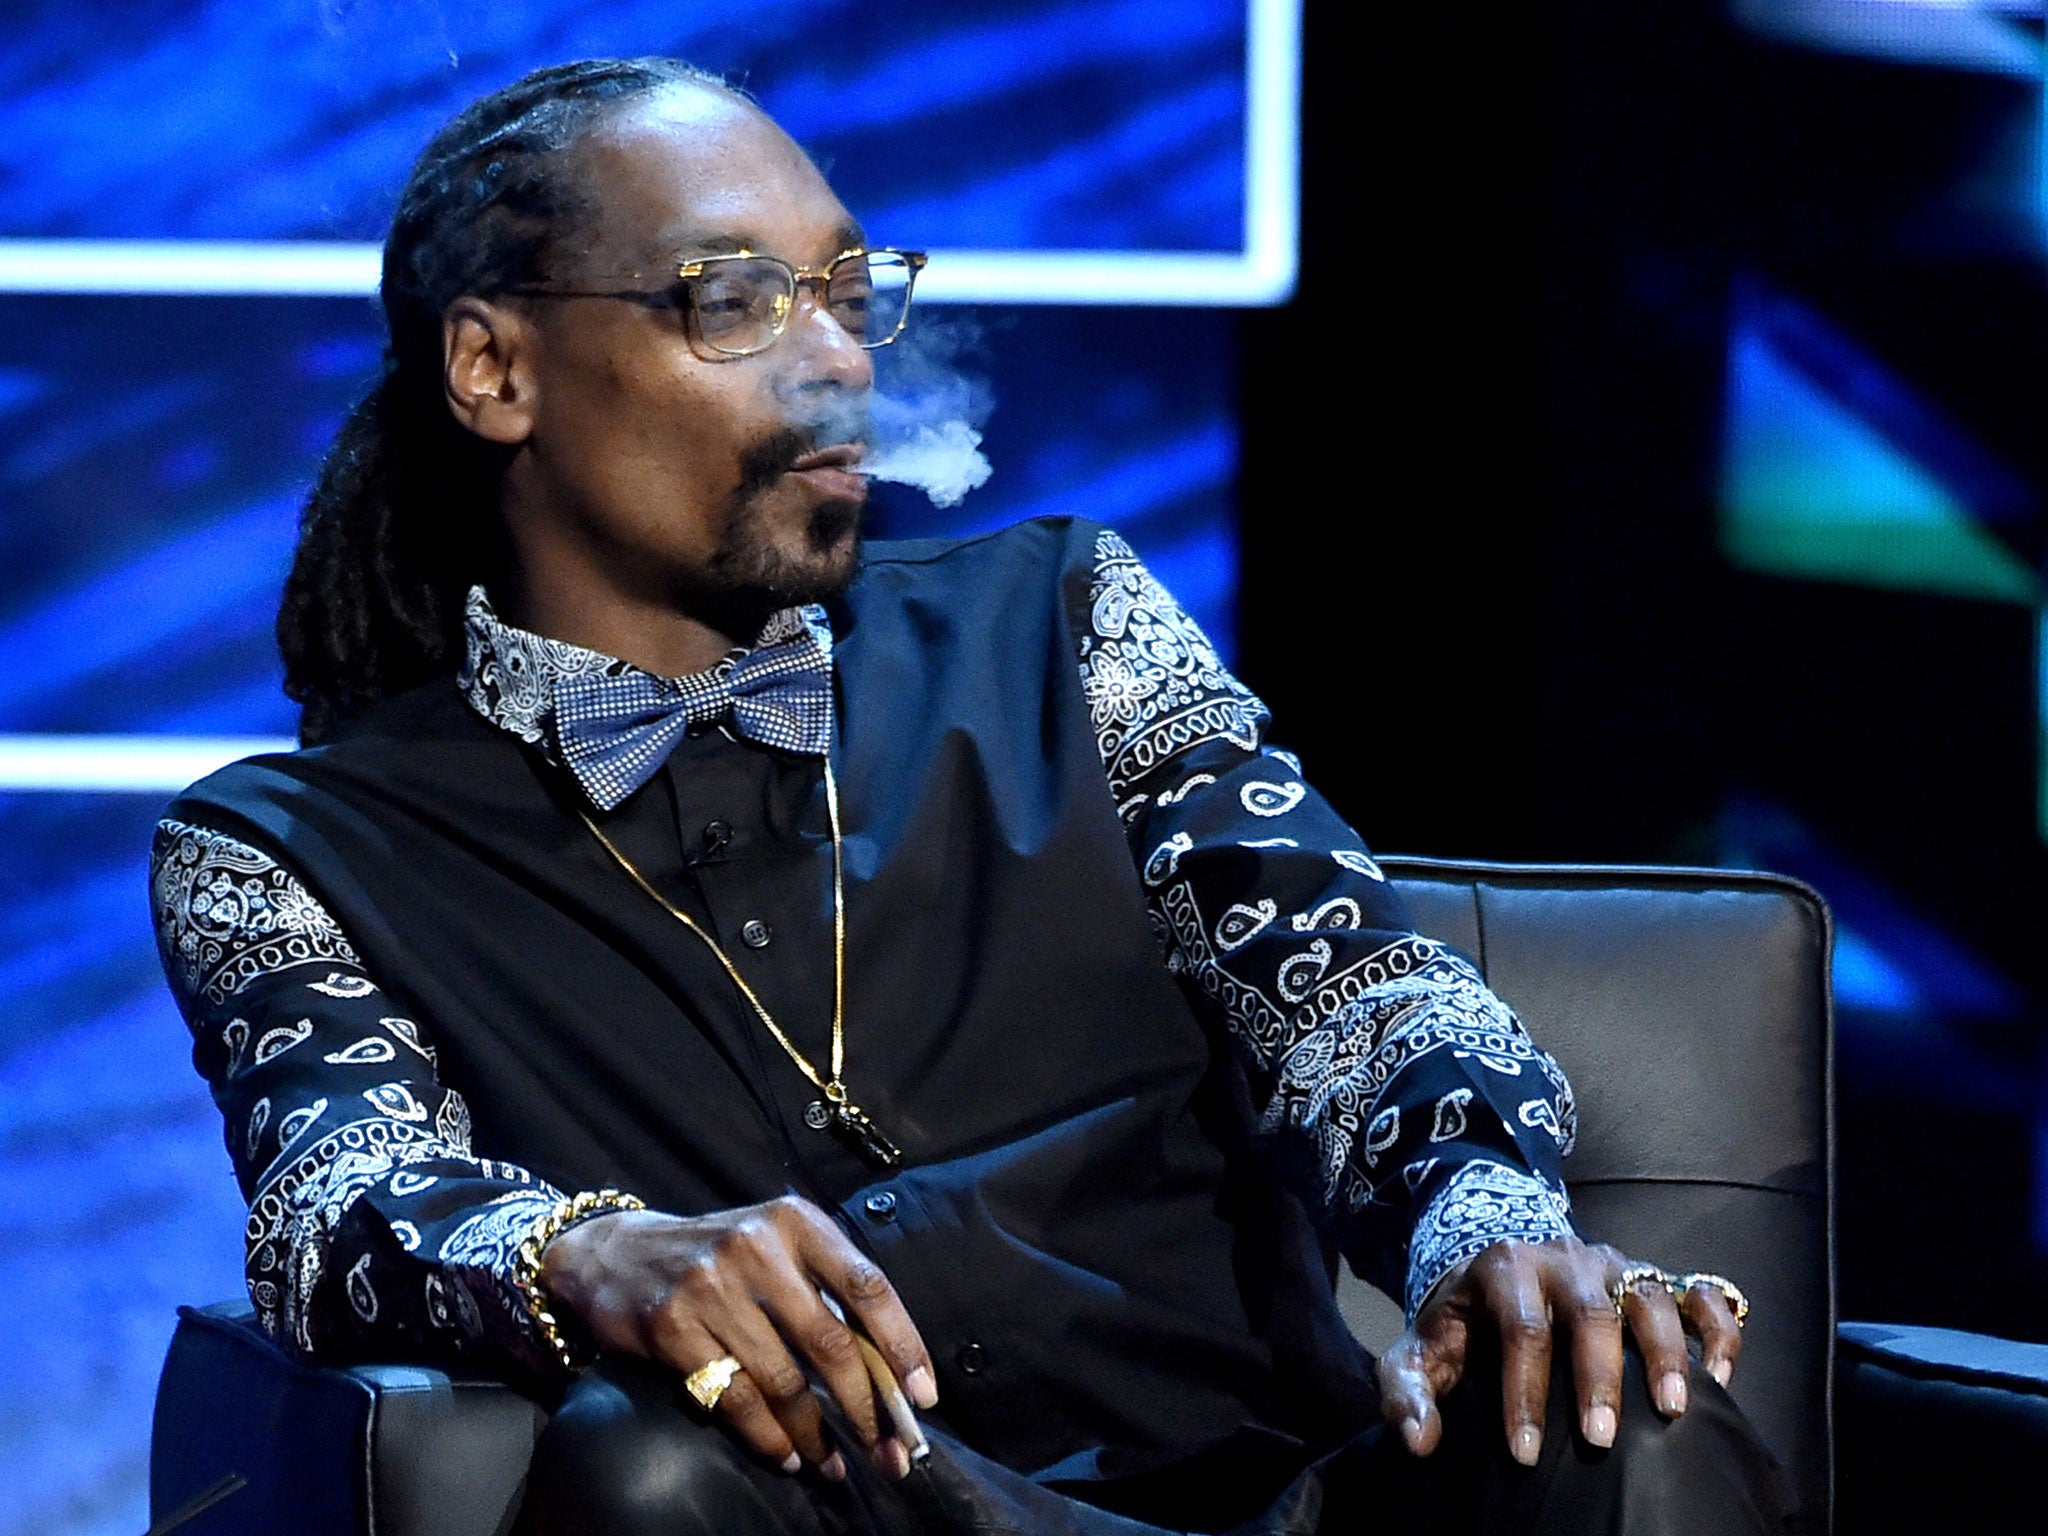 Twitter's new CEO? Snoop Dogg appears onstage at the Comedy Central Roast earlier this year